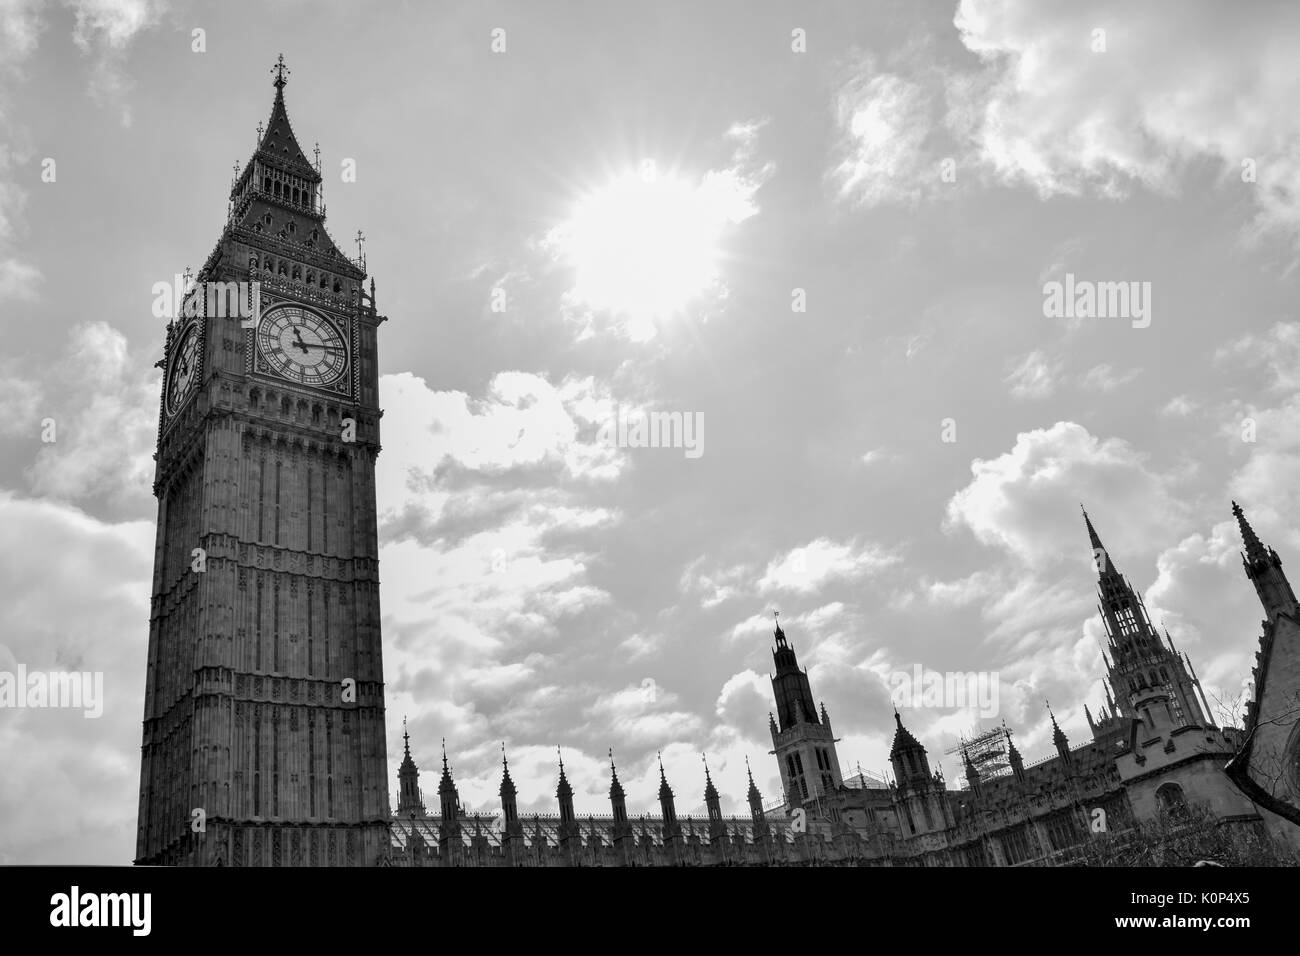 Big Ben, London, UK. A view of the popular London landmark, the clock tower known as Big Ben, showing 3pm as the time set against a blue and cloudy sky. Stock Photo